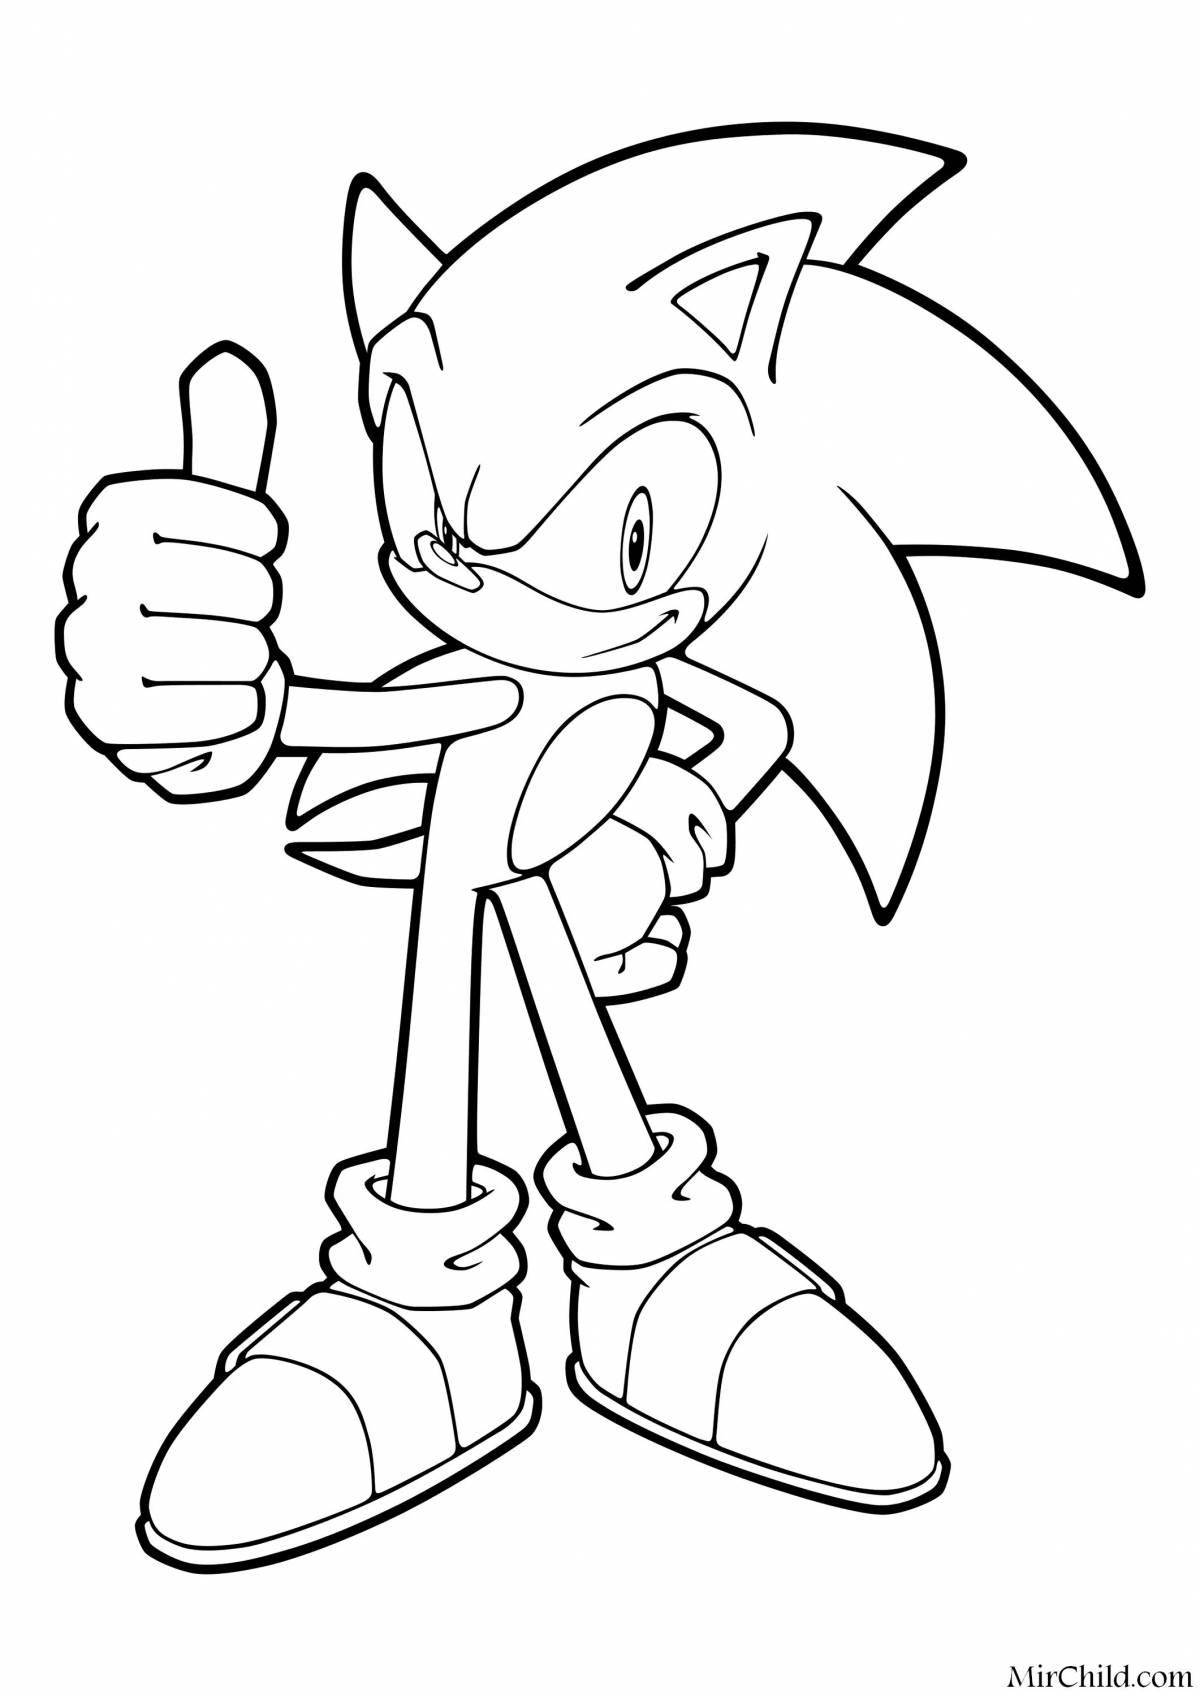 Sonic theos bright coloring